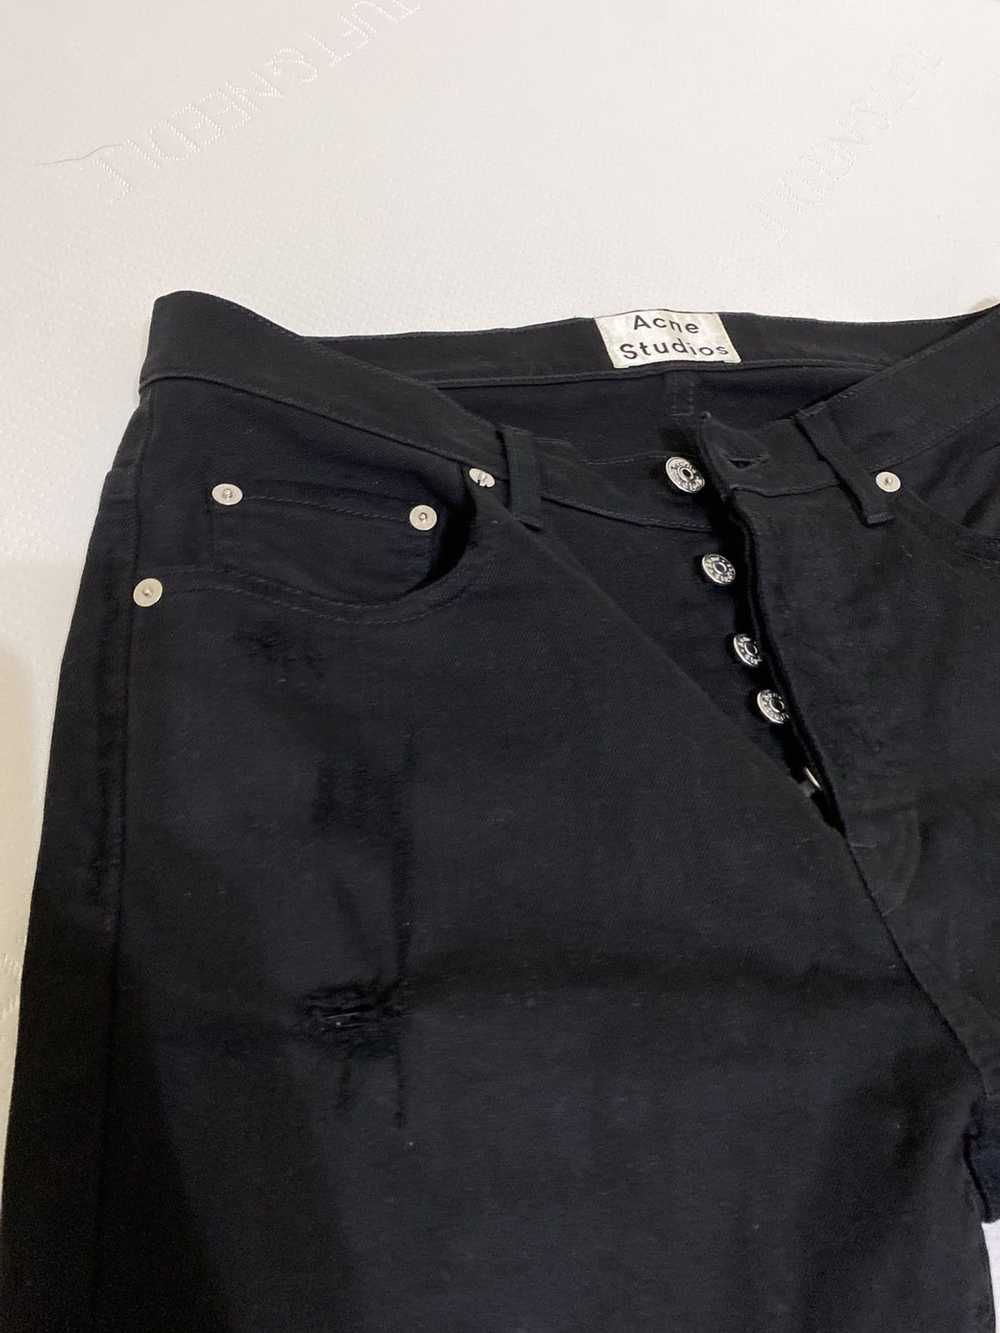 Acne Studios acne town jeans black fray cw - image 4